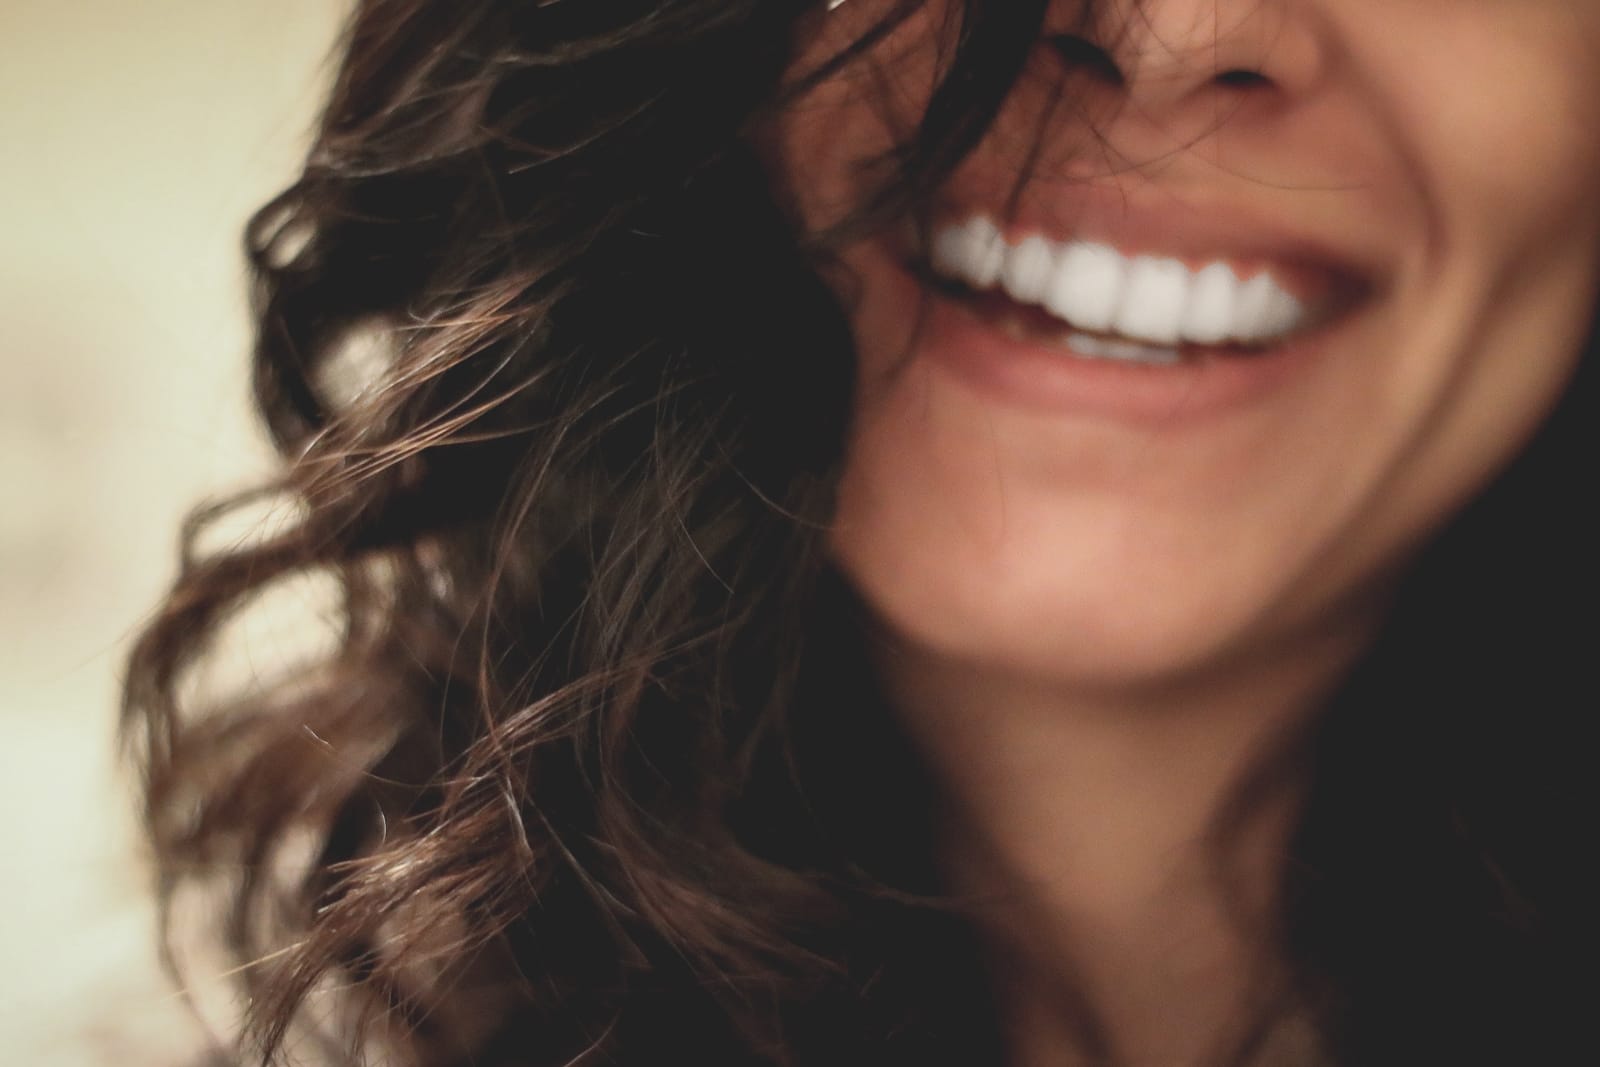 Image of a woman smiling, showing only her teeth